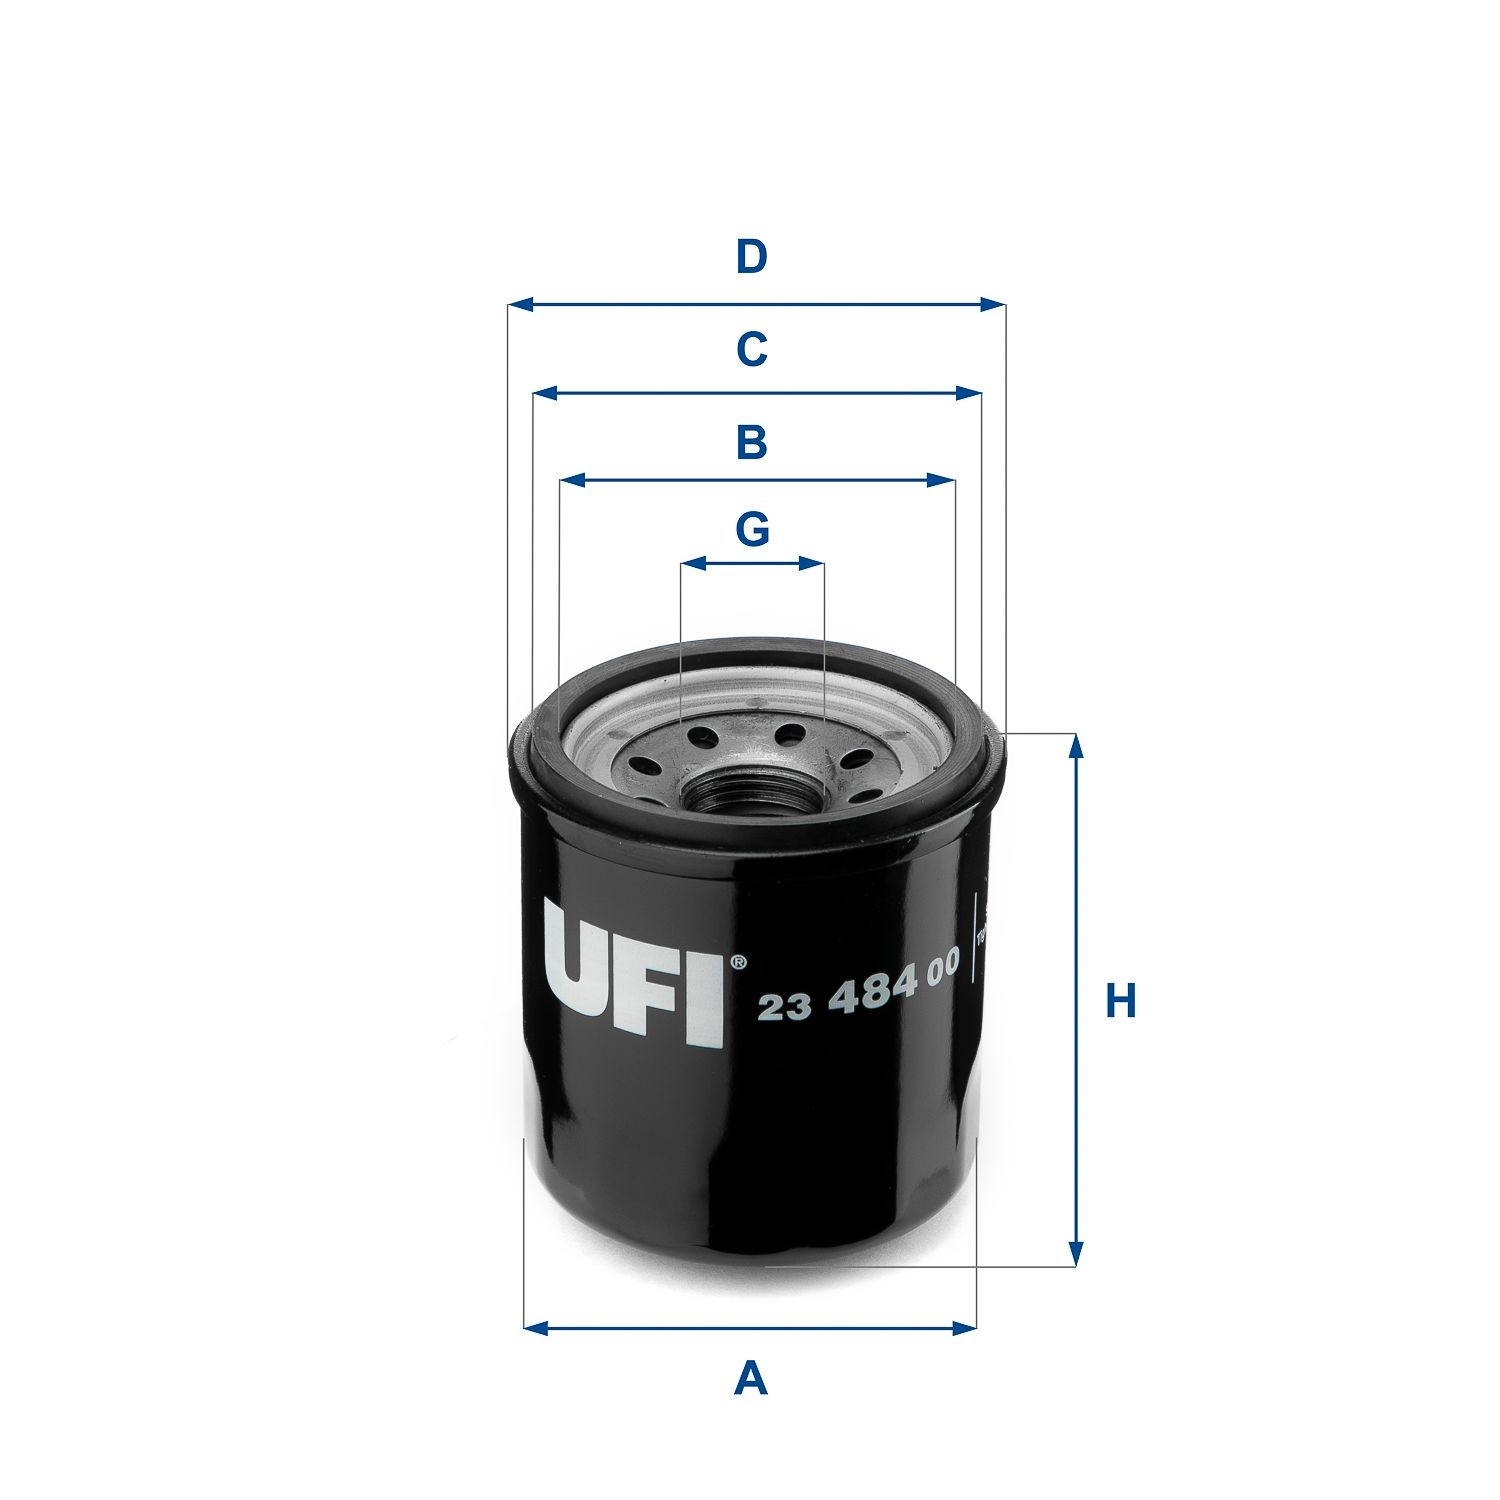 23.484.00 UFI Oil filters NISSAN M 20 X 1,5, with one anti-return valve, Spin-on Filter